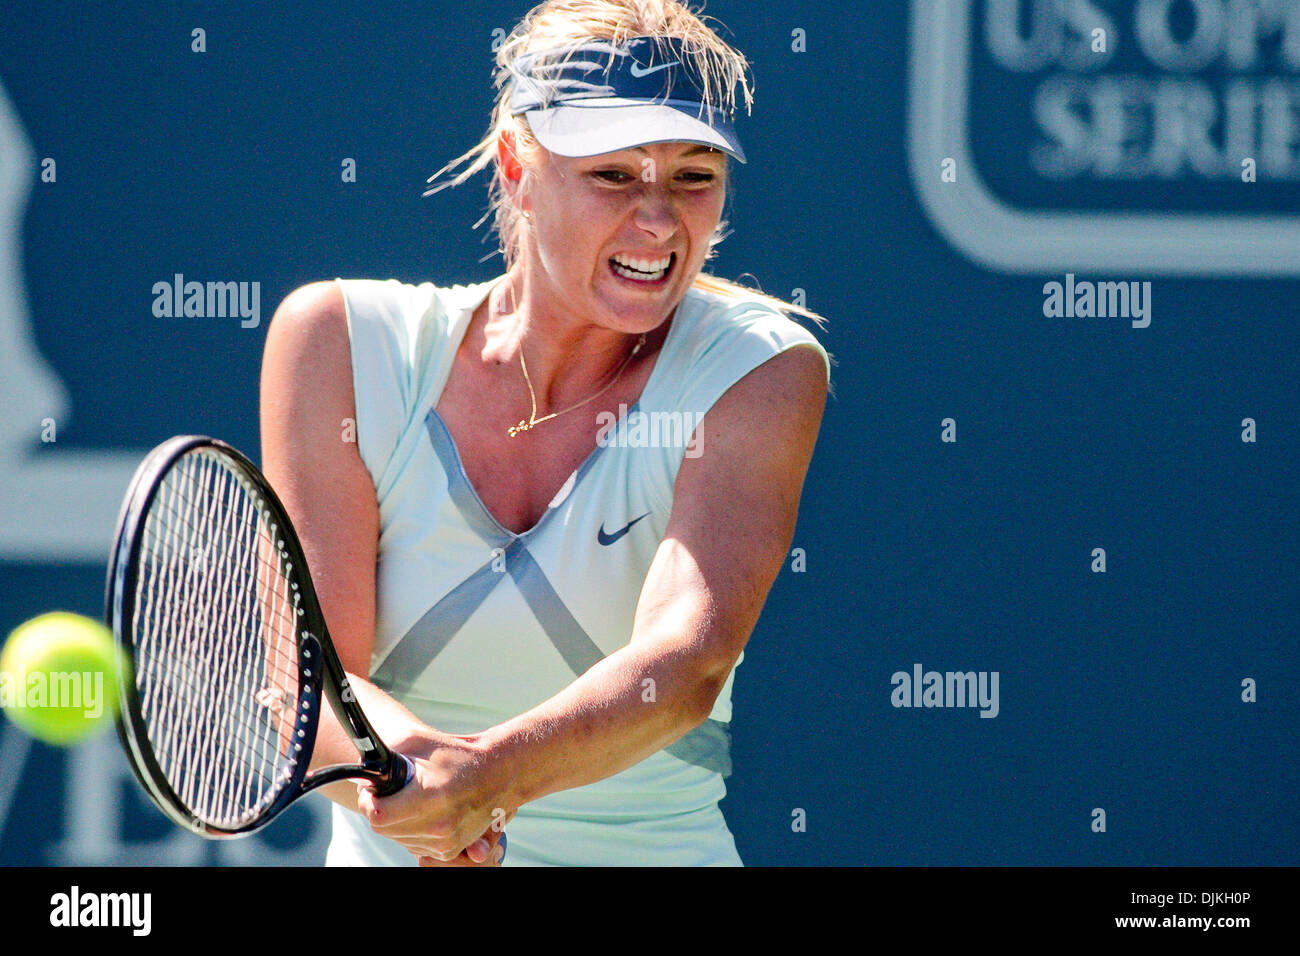 Stanford Calif. Maria SHARAPOVA (RUS) returns a serve against Olga  GOVORTSOVA (BLR)on Thursday during the Bank of the West Classic women's  tennis tournament at the Taube Family Tennis Stadium. (Credit Image: ©